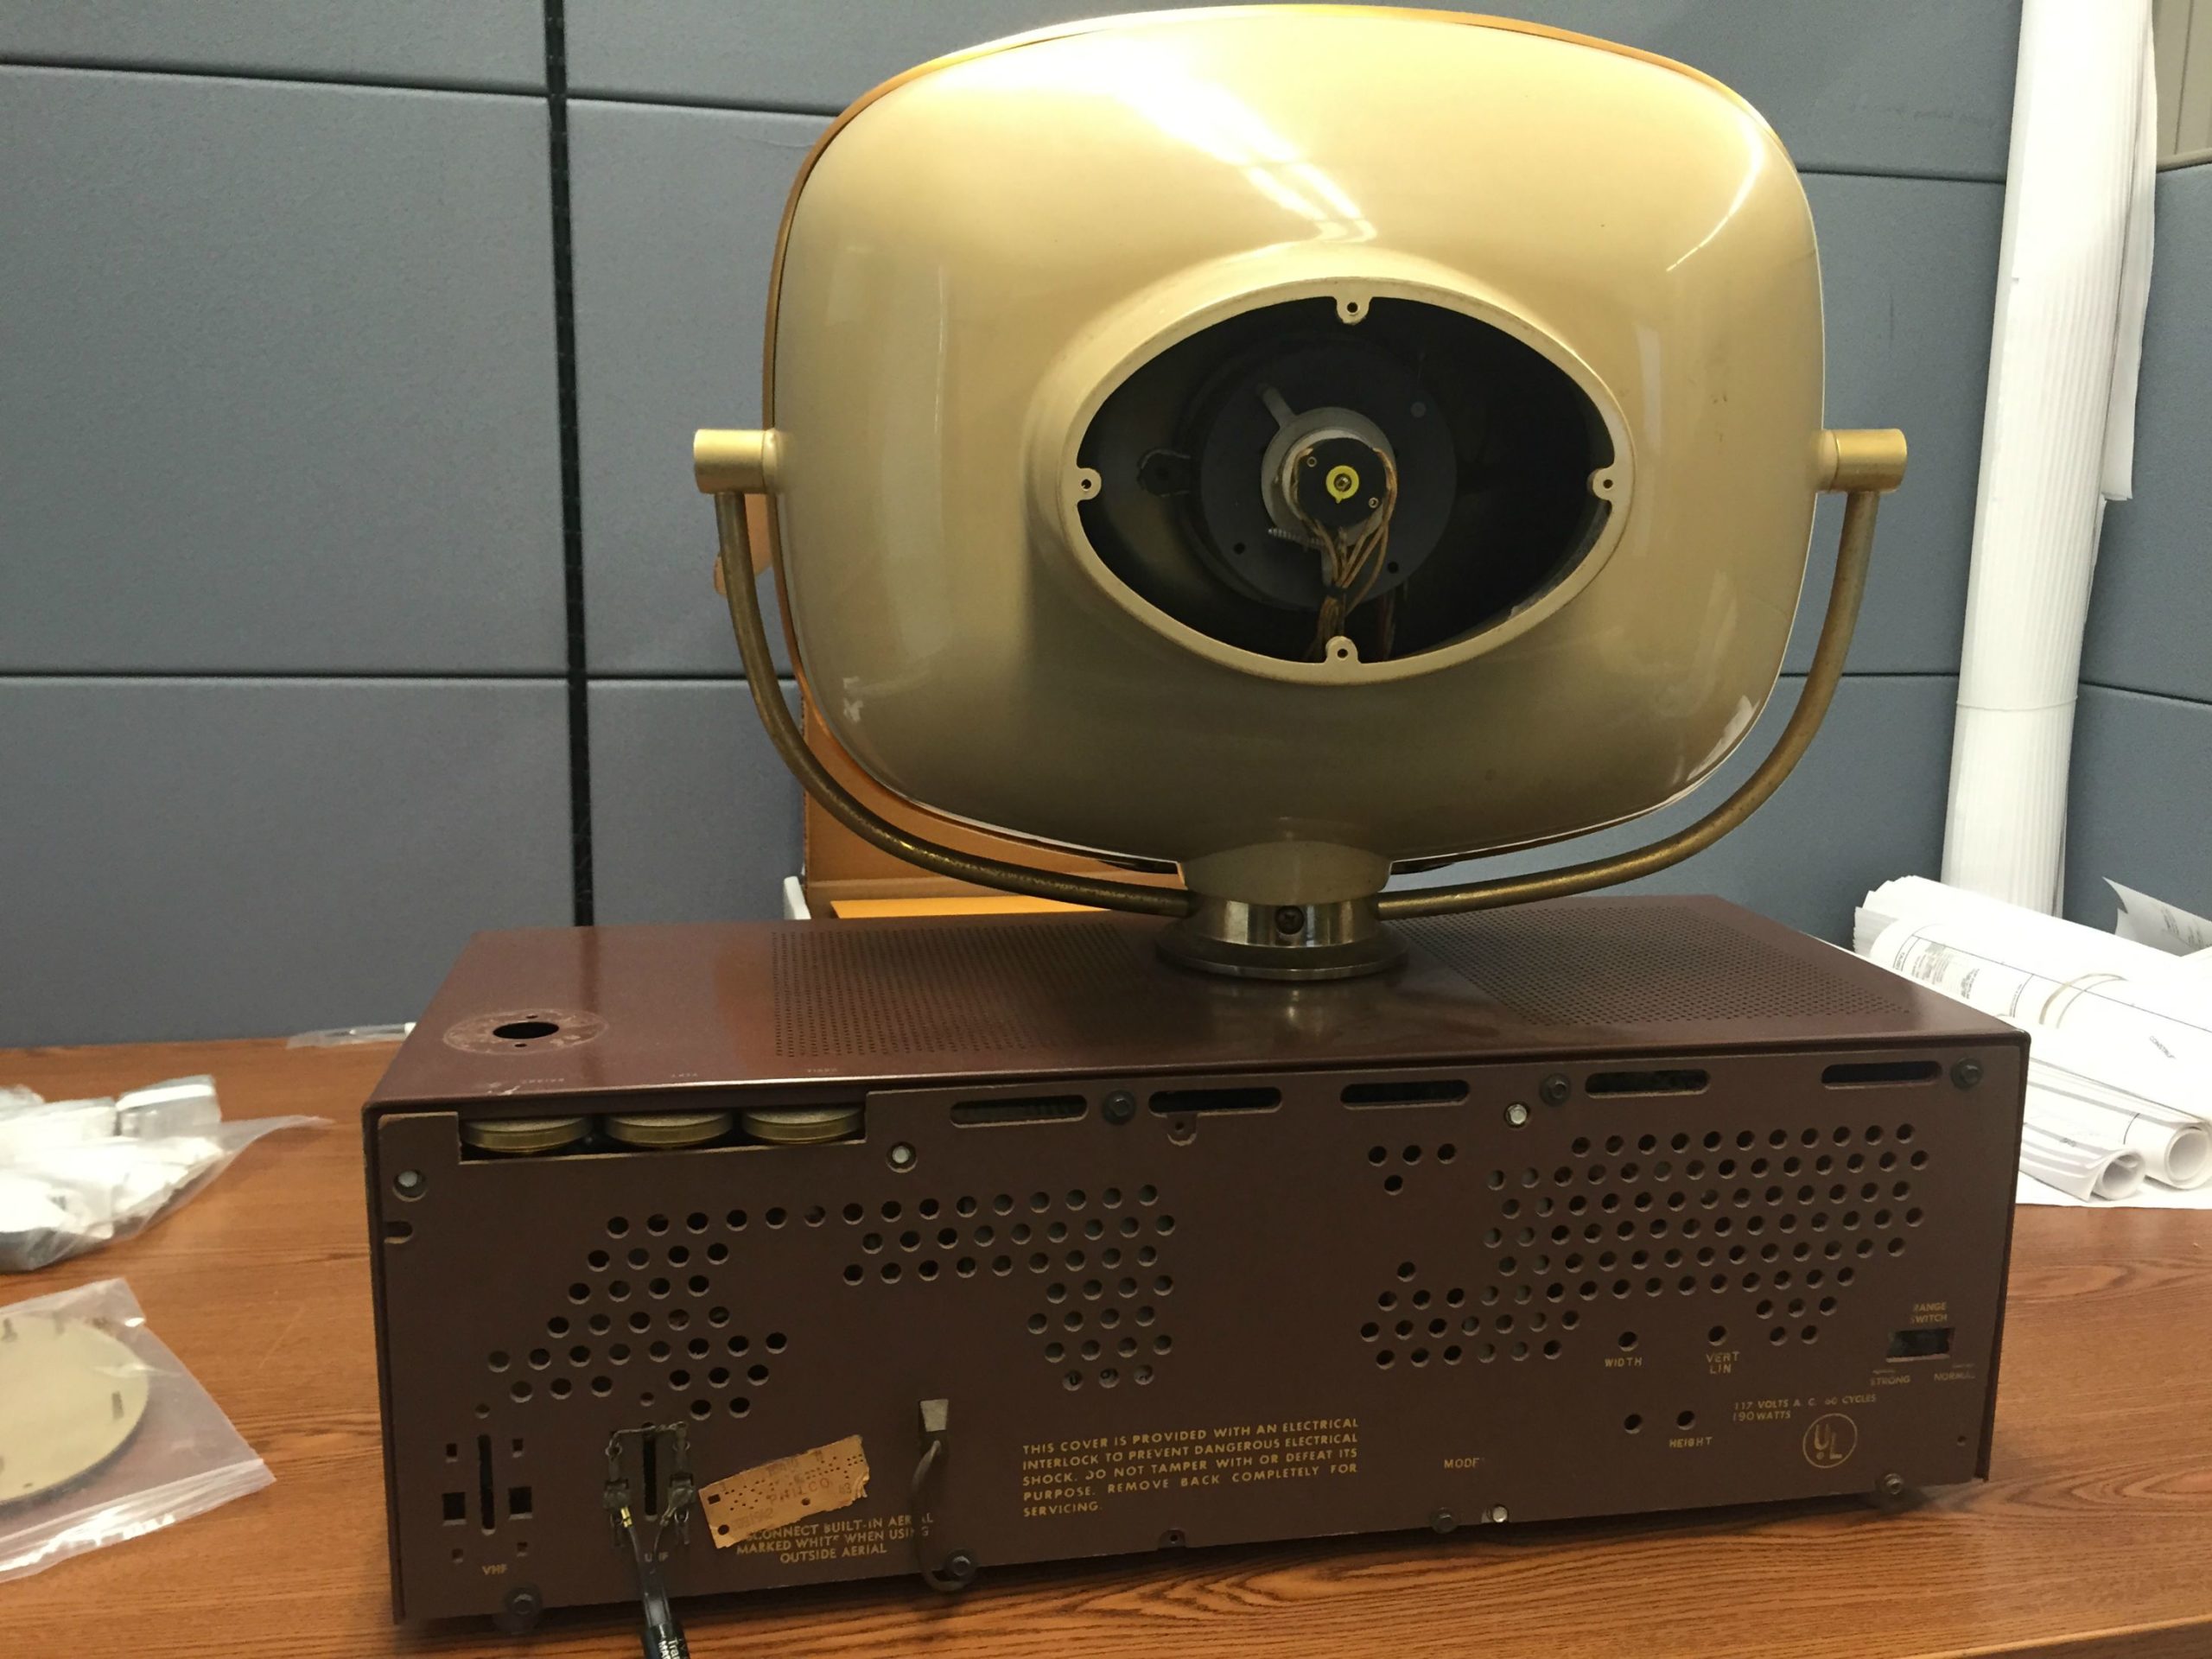 There’s A Modern TV Hidden Inside This Classic 1950s Philco Predicta